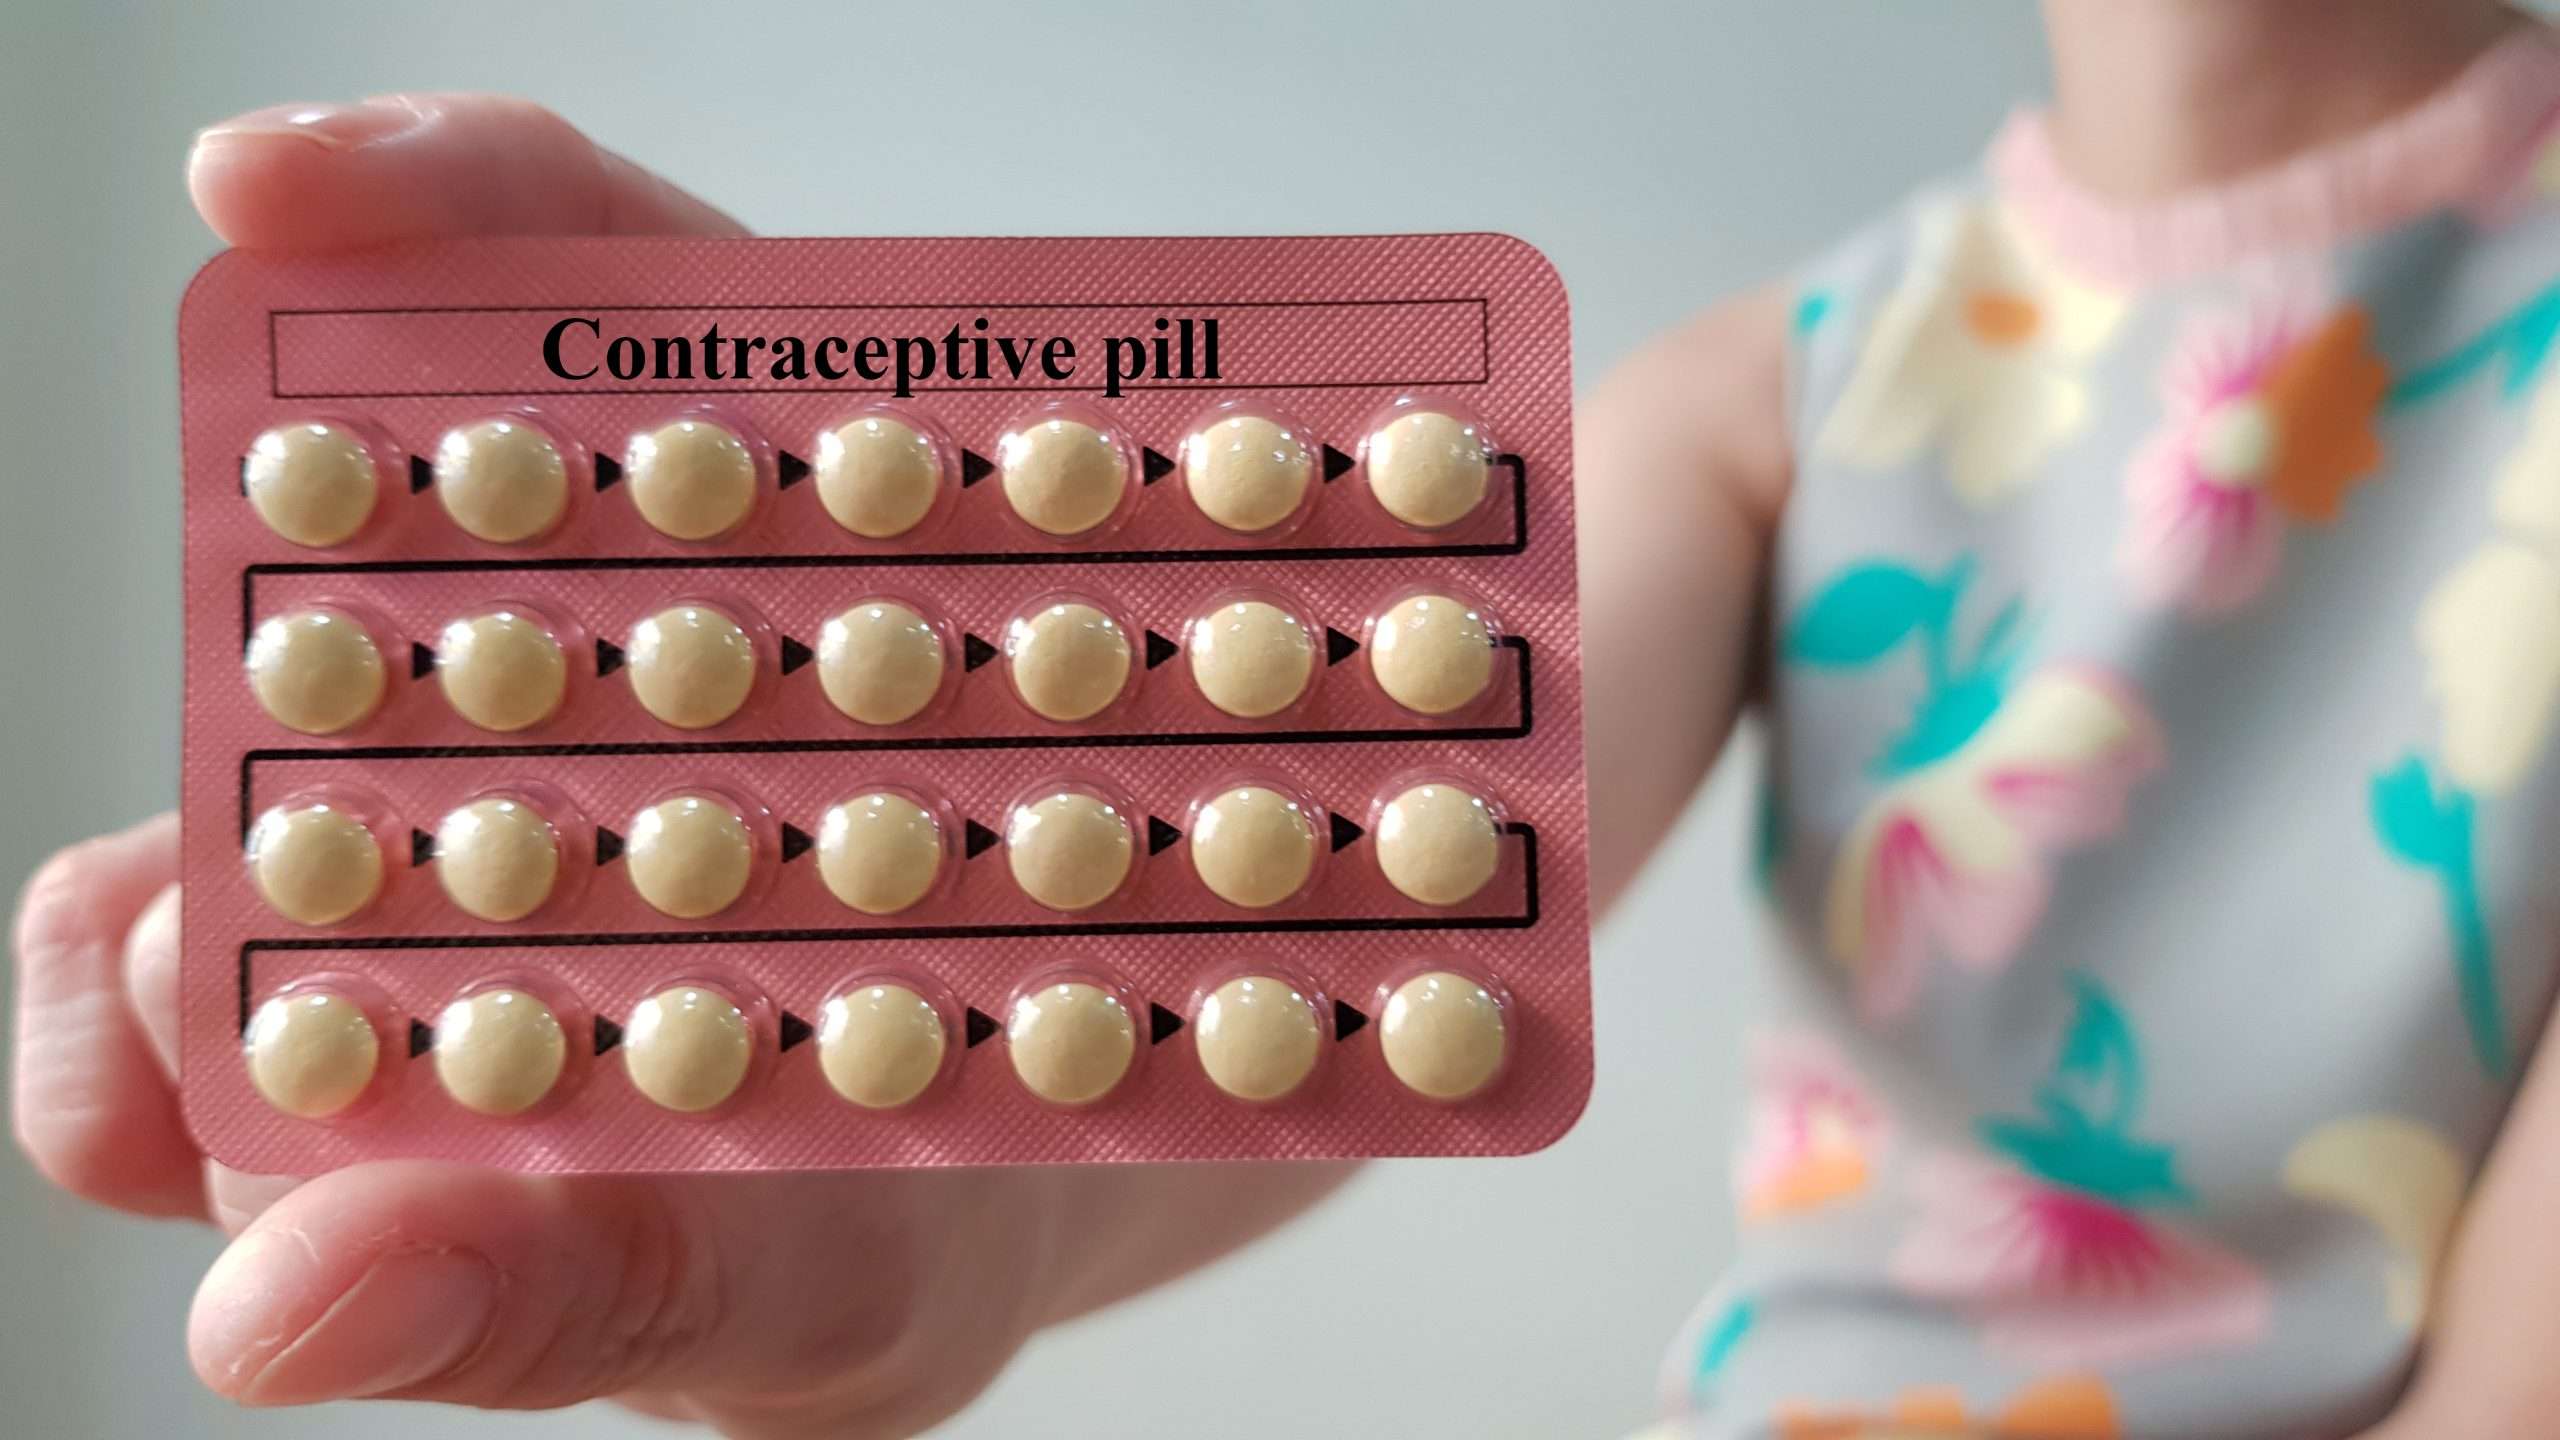 Can Taking Hormonal Contraceptives In The Long